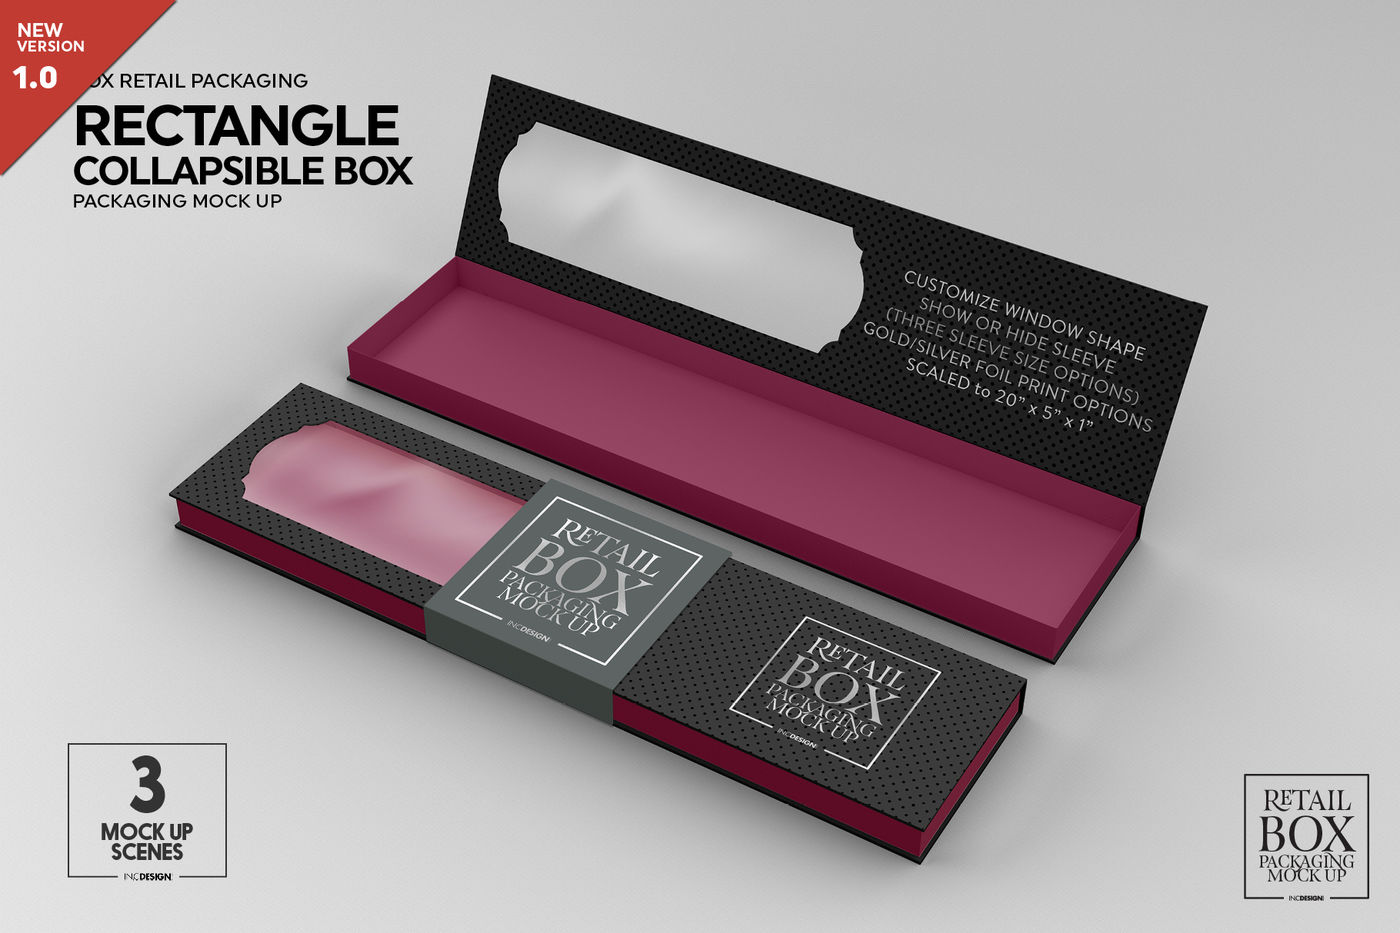 Download Rectangle Collapsible Box Packaging Mockup By INC Design ...